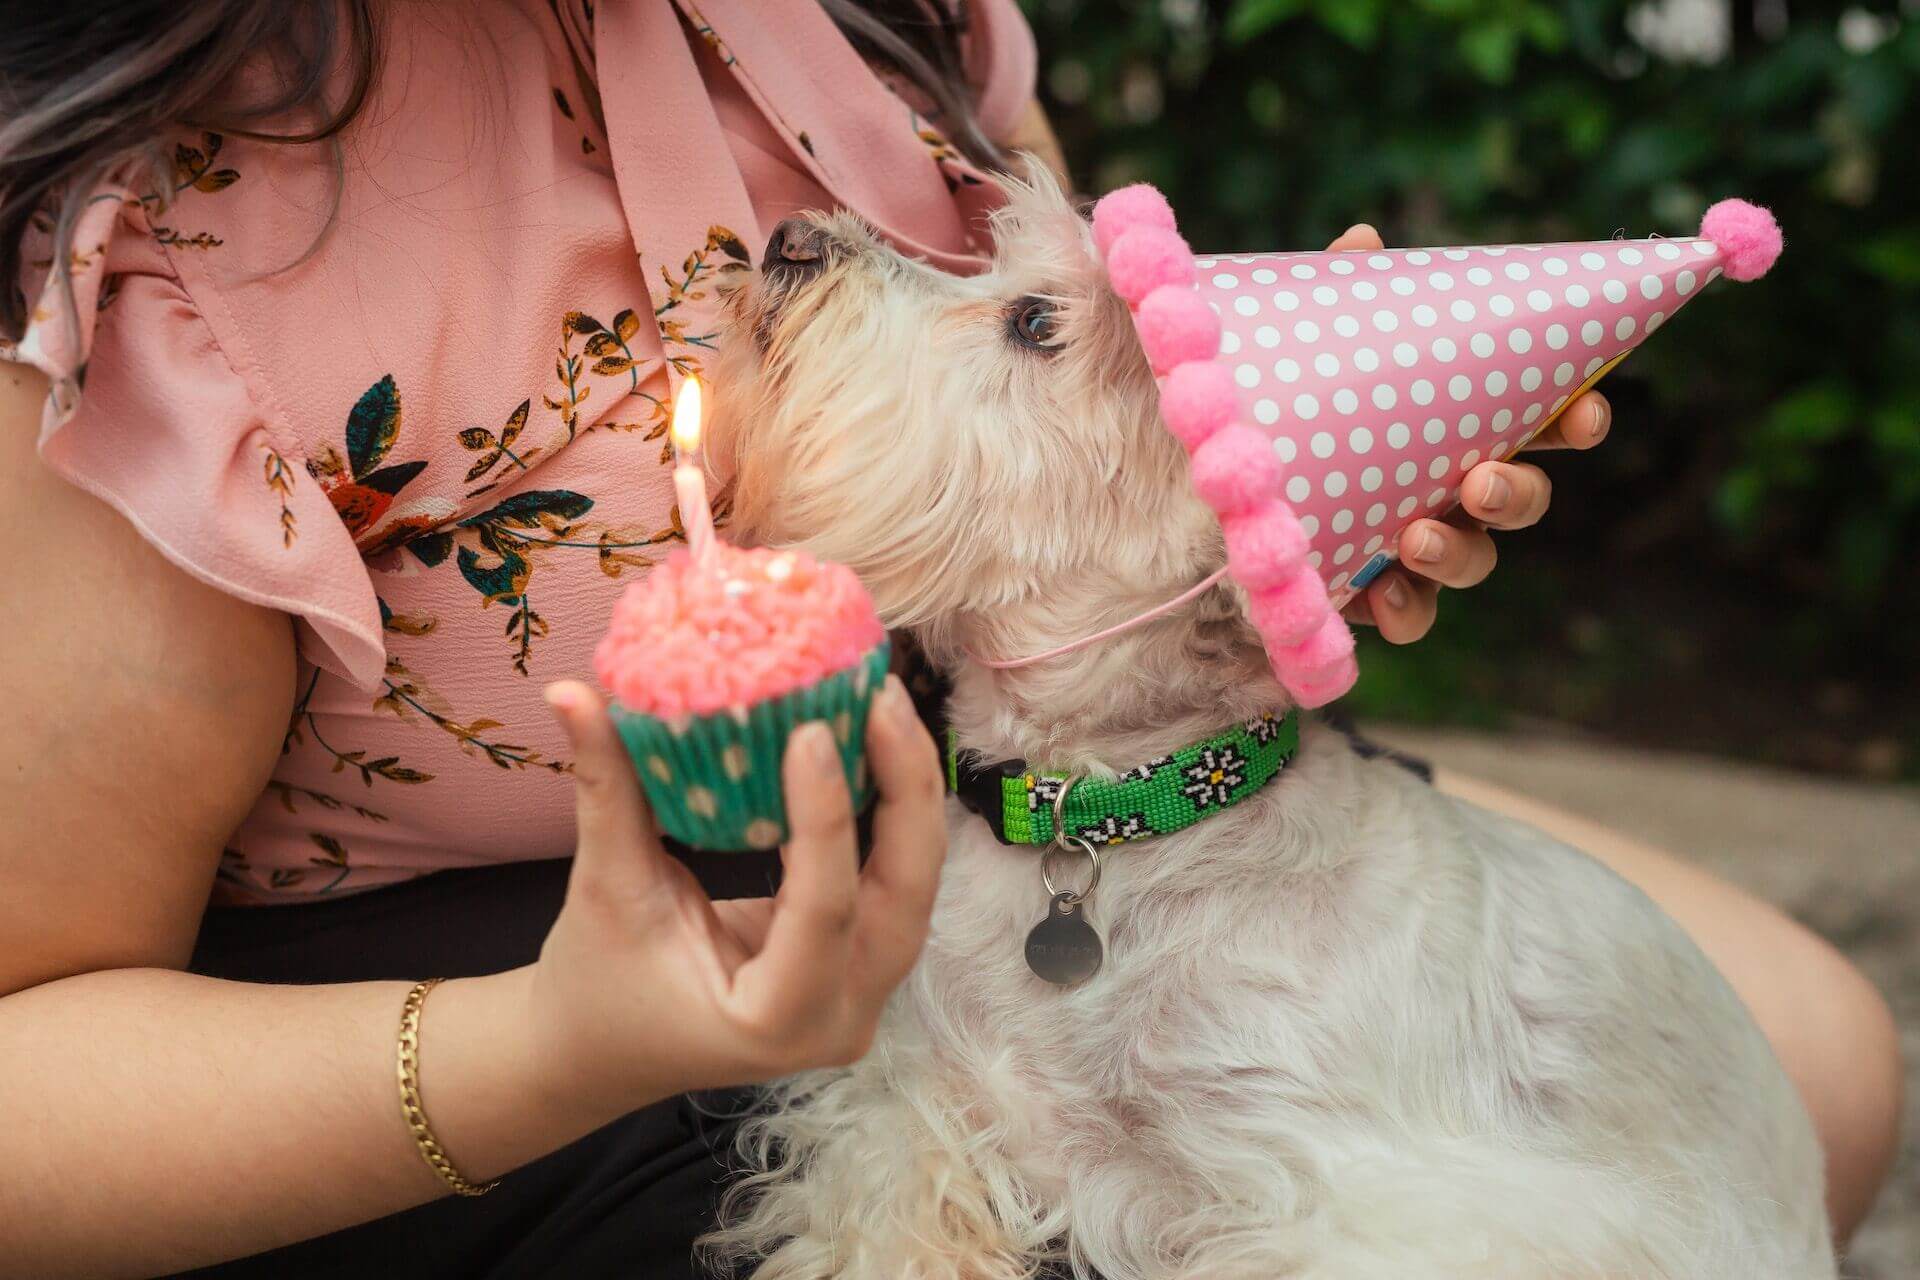 A dog wearing a party hat sitting by a woman holding a cupcake